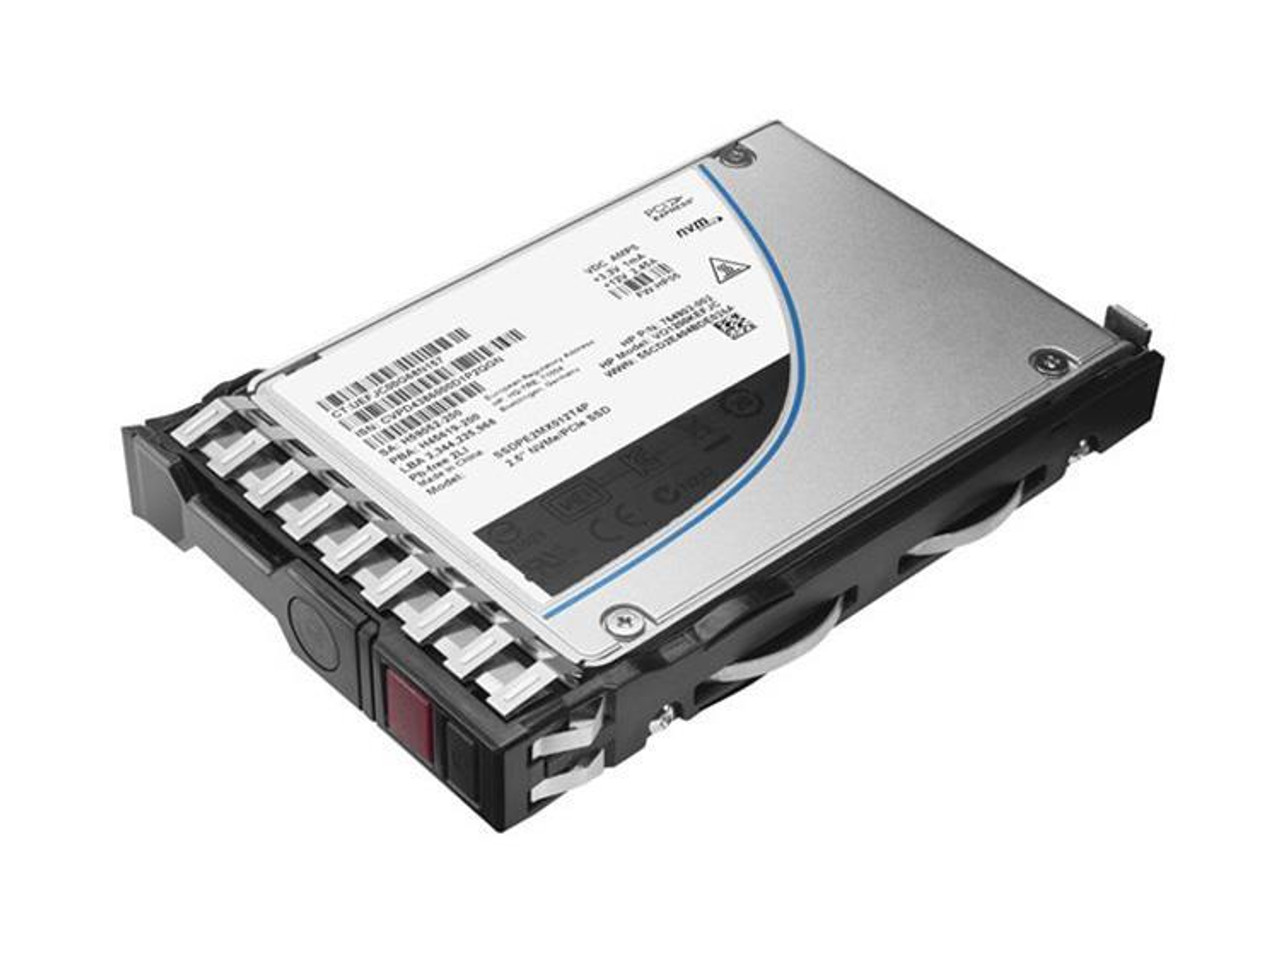 P40507-B21 HPE 1.92TB SAS 12Gbps Read Intensive 2.5-inch Internal Solid State Drive (SSD)